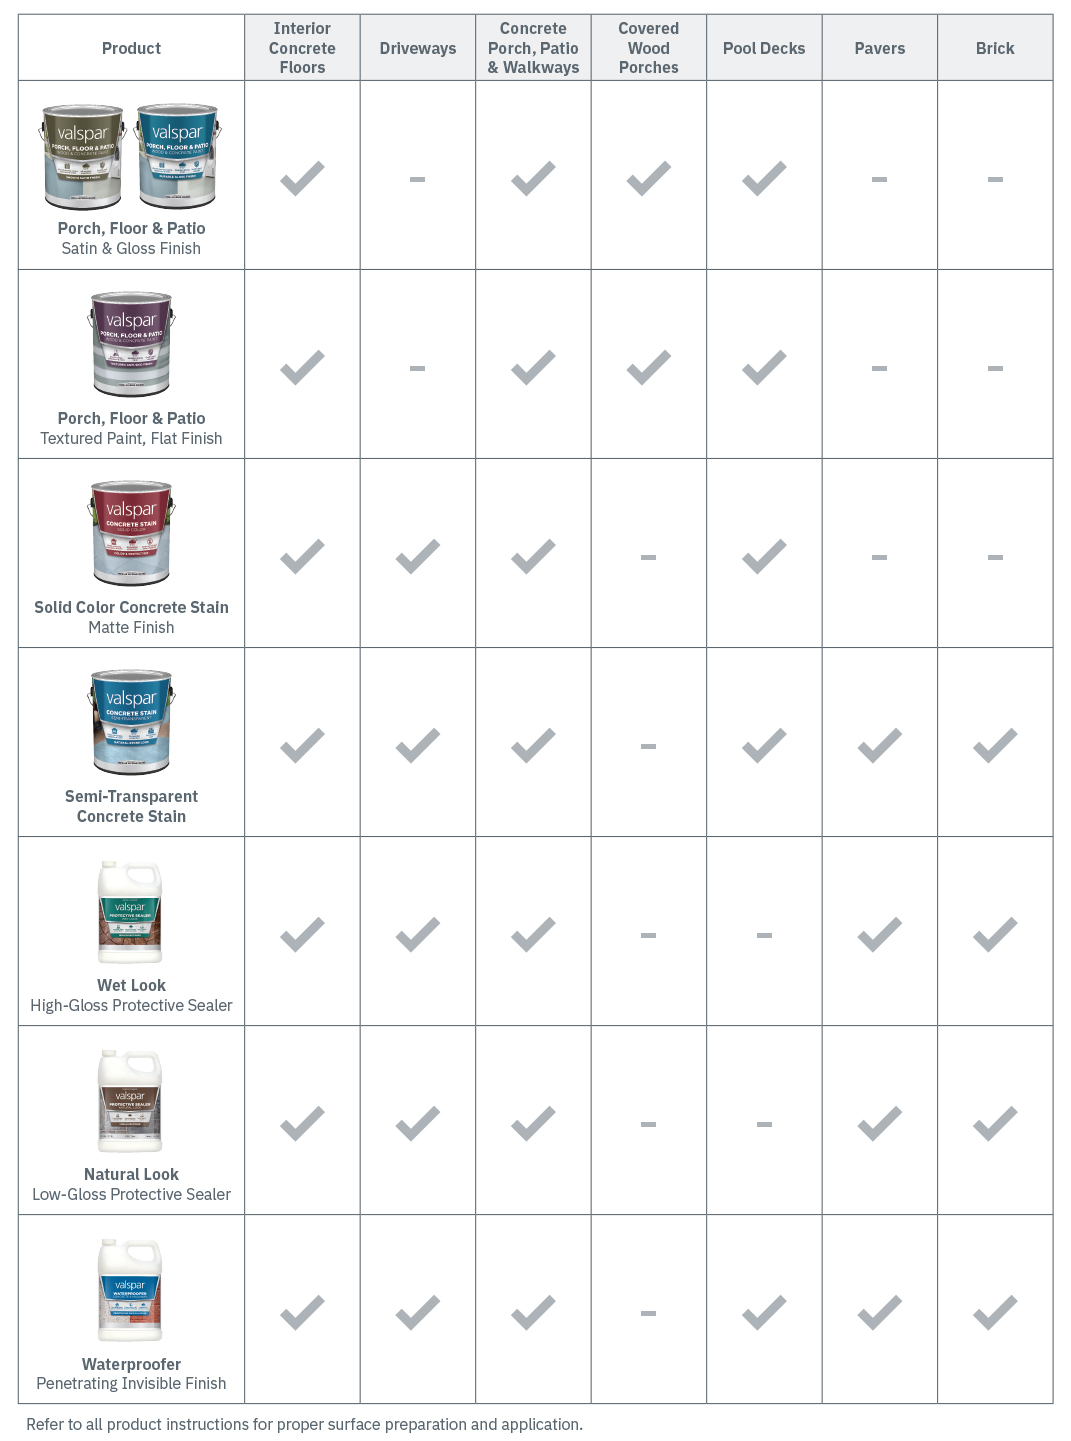 Chart outlining recommendations for Valspar products by surface type. 